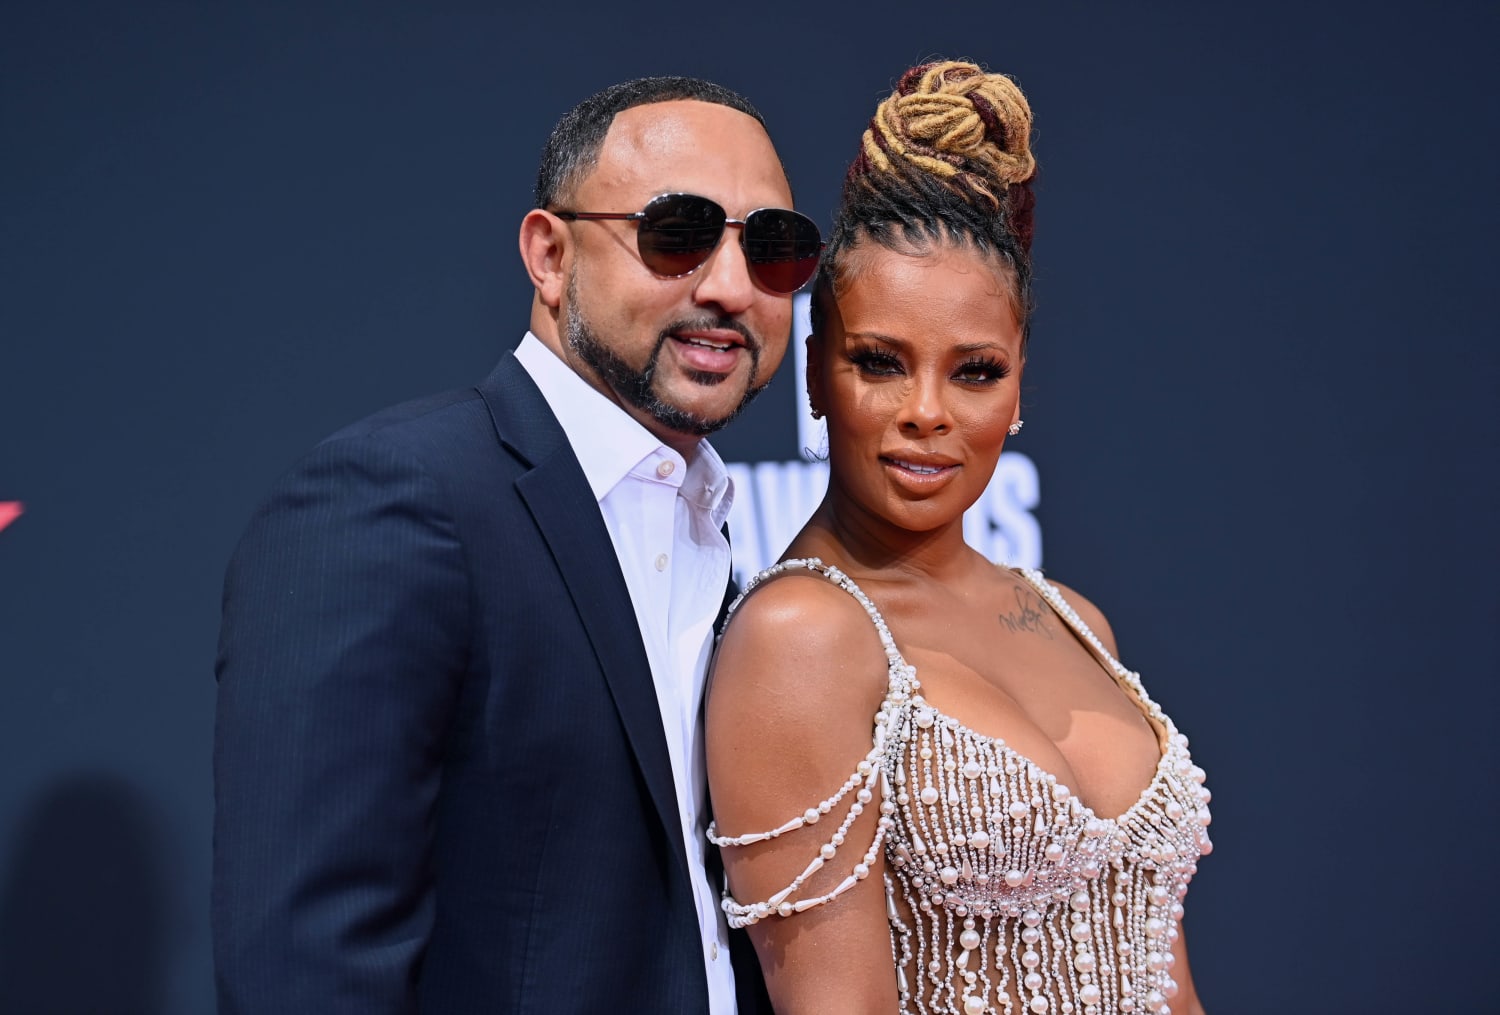 'Real Housewives' star Eva Marcille files for divorce from husband